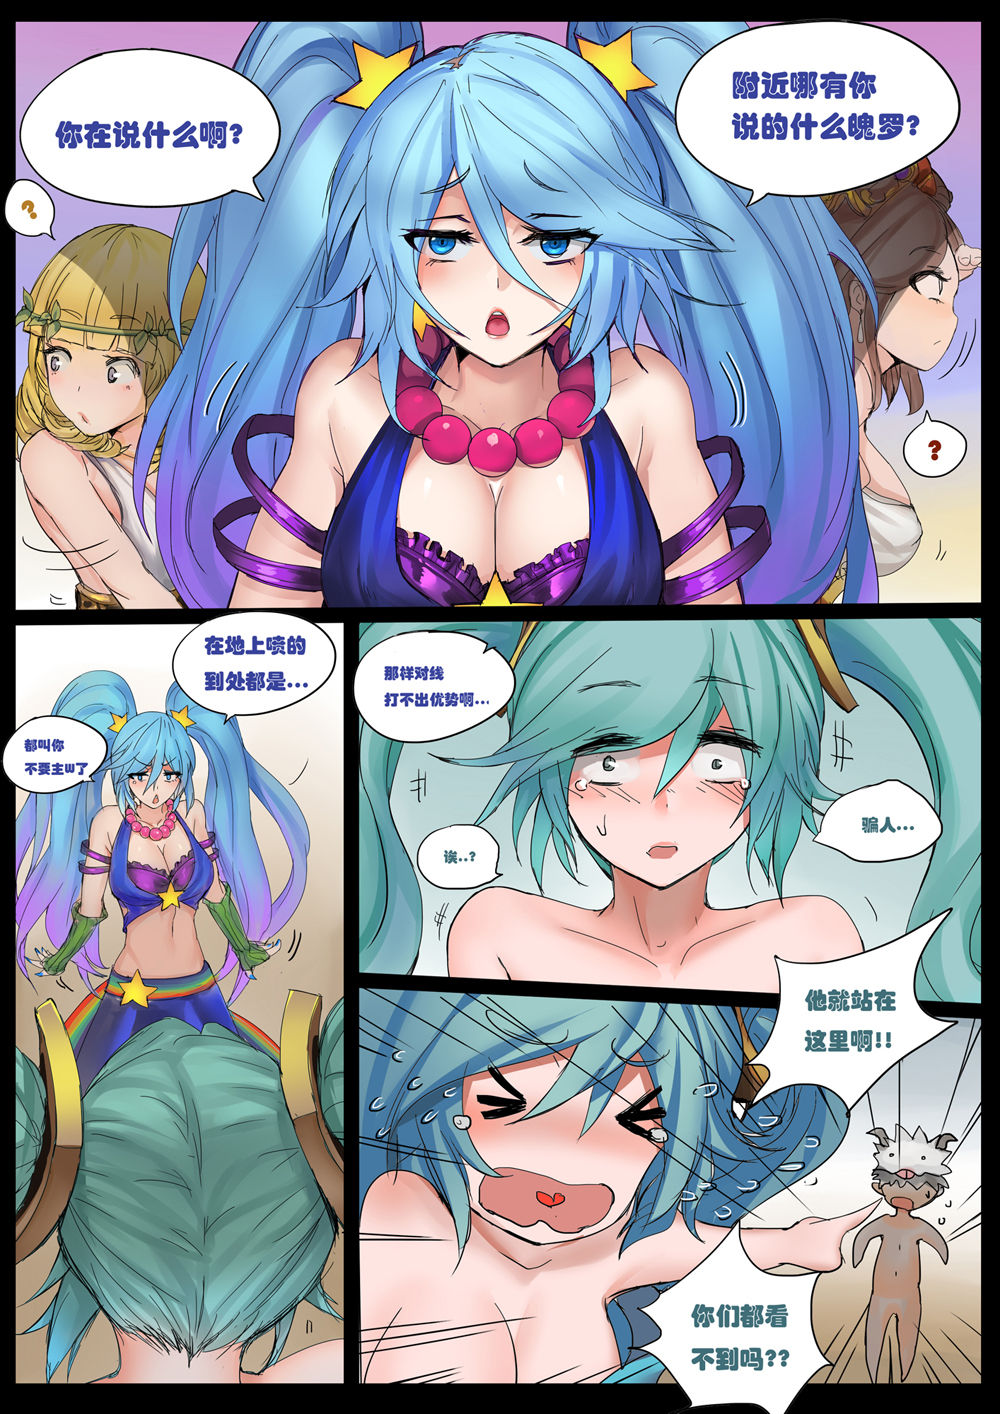 [Pd] Sona's Home Second Part (League of Legends) [Chinese] [Pd] 琴女之家[后篇] (League of Legends) [中国語]